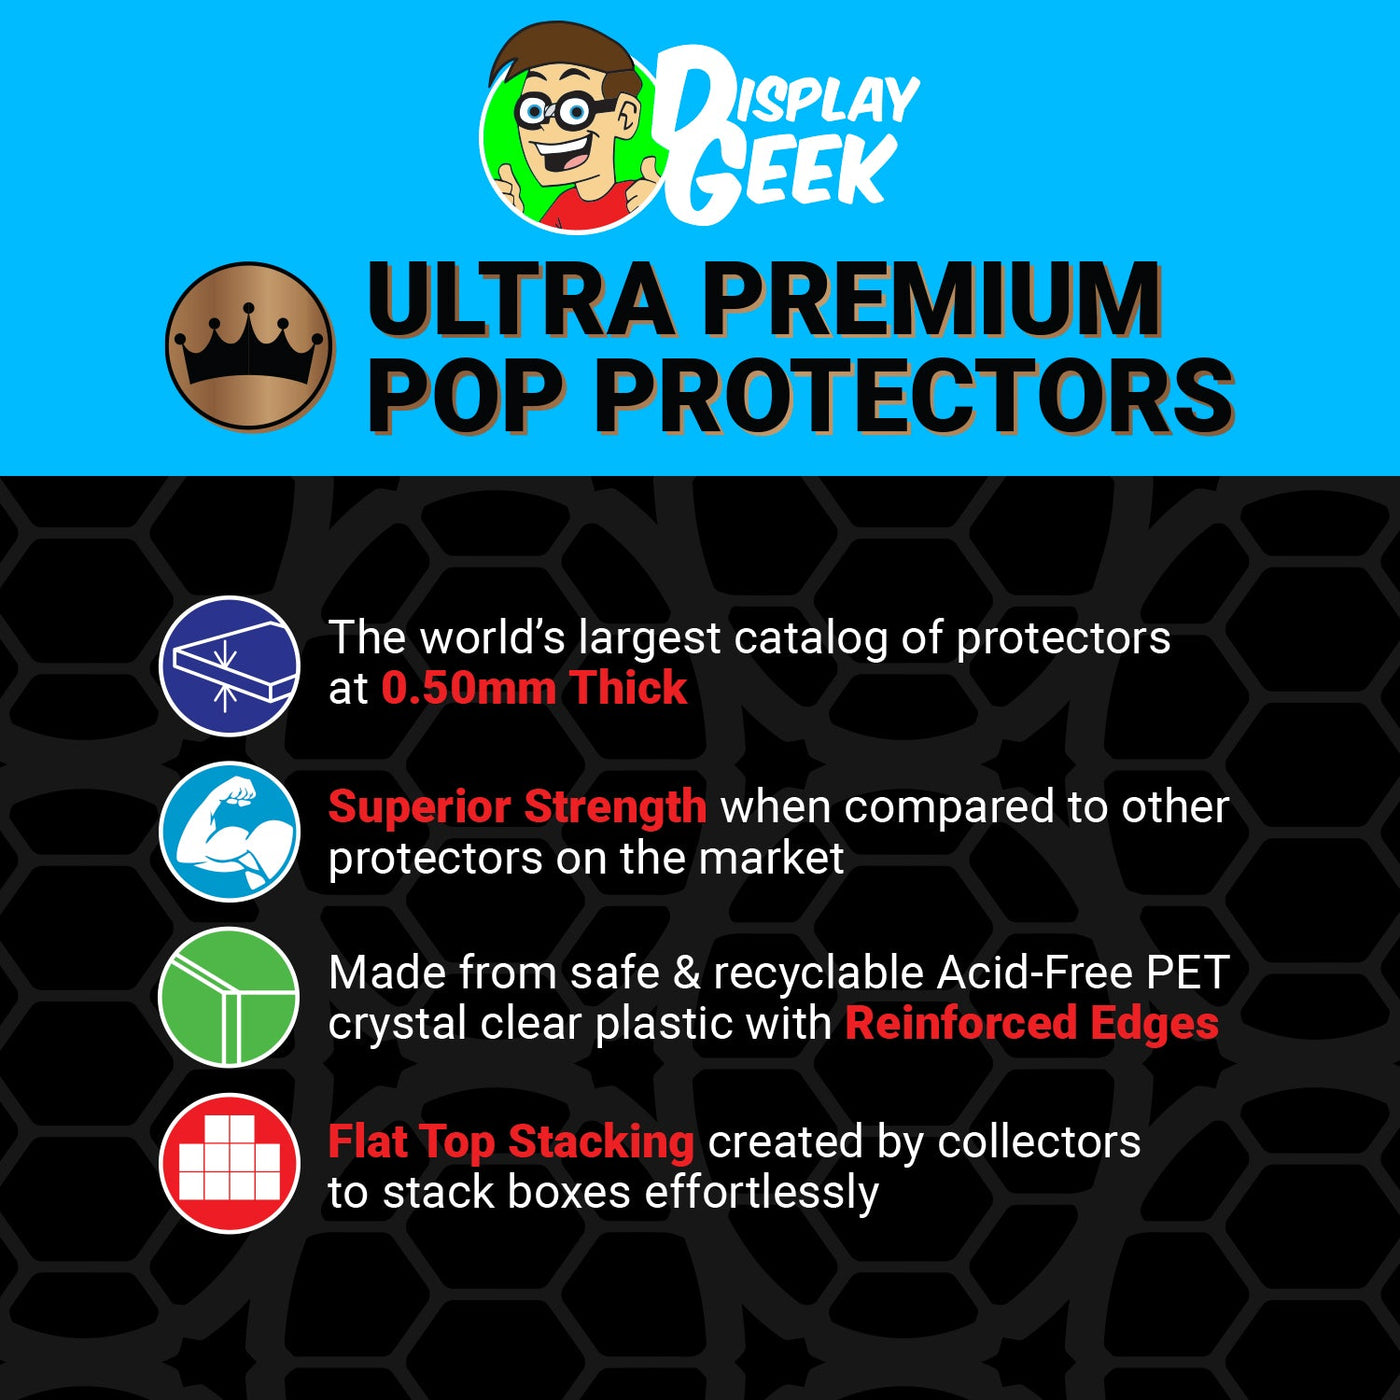 Pop Protector for Freddy Funko Summertime Freddy on The Protector Guide App by Display Geek